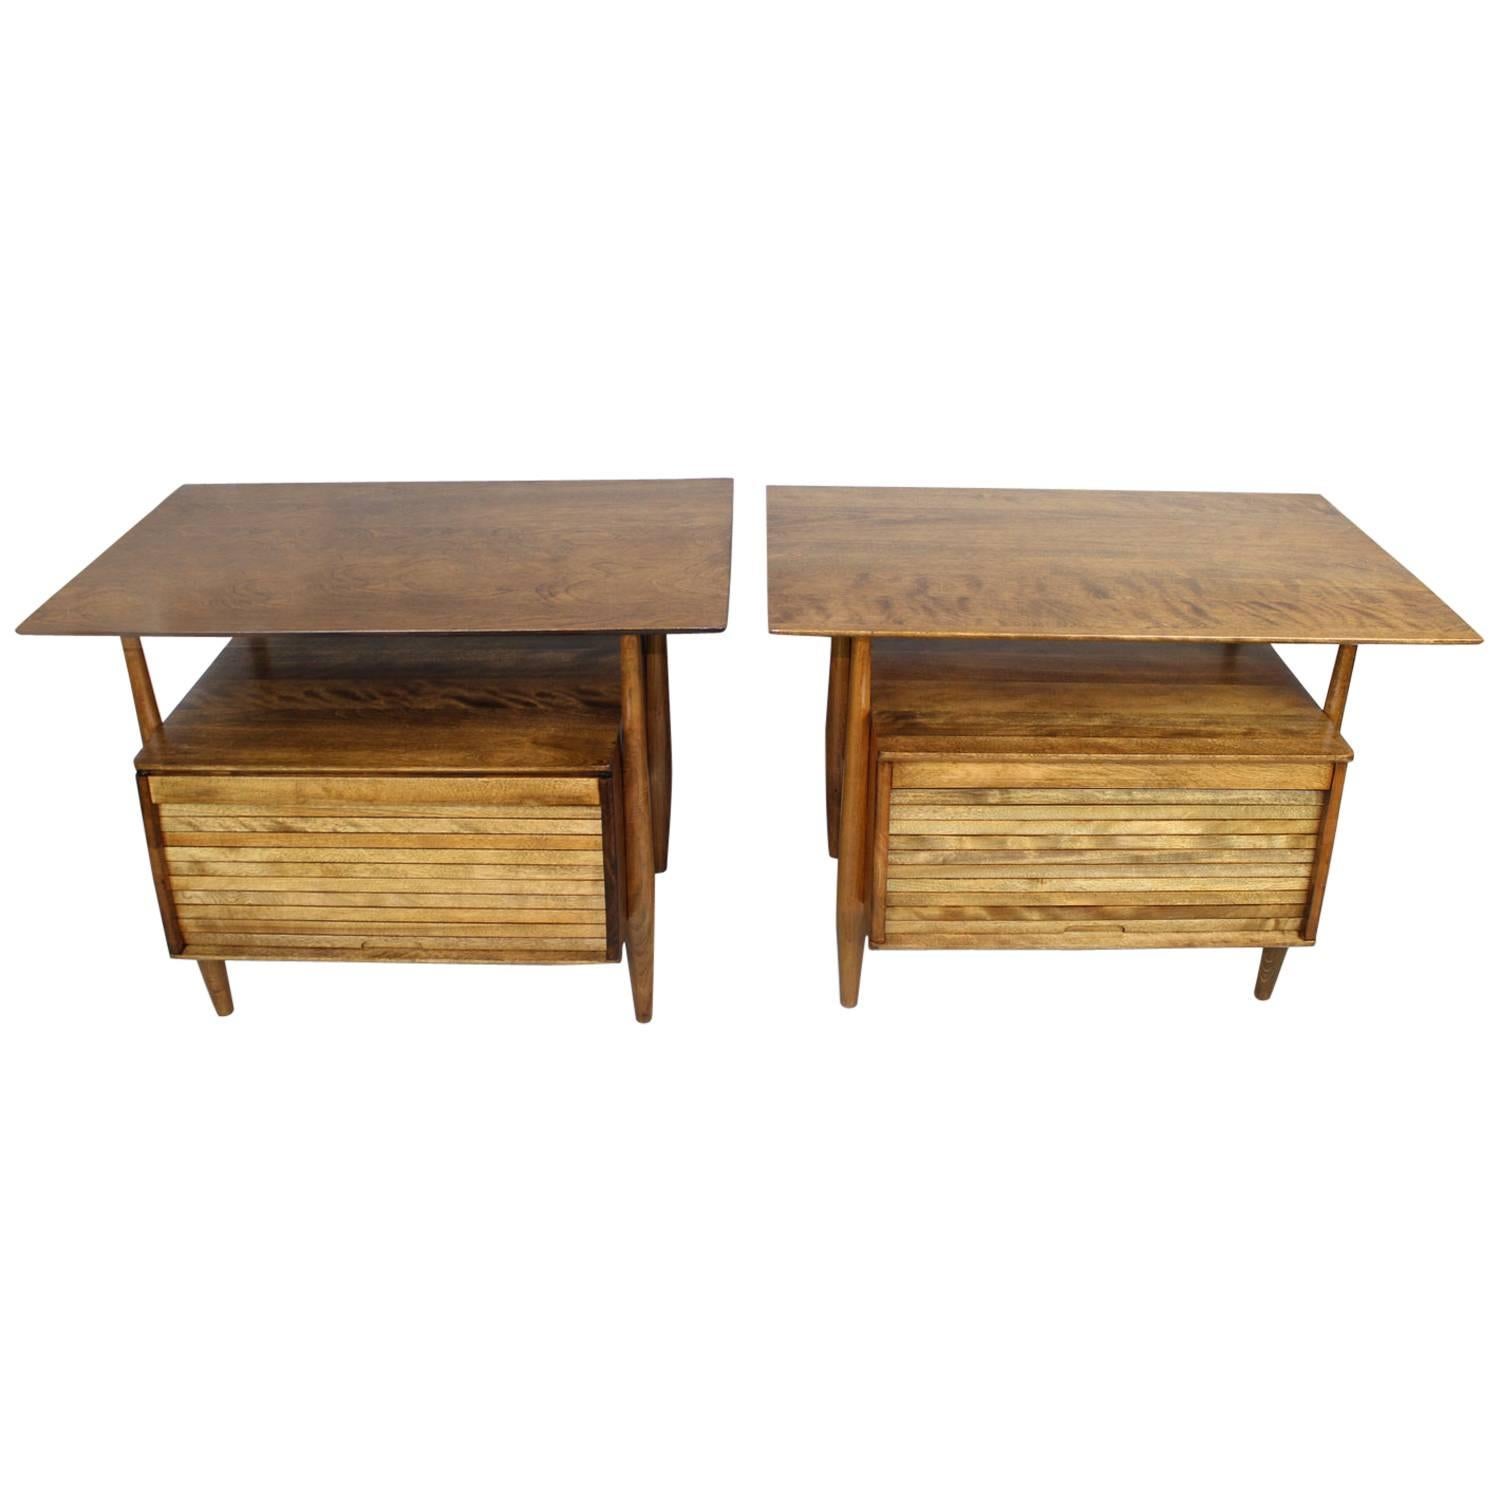 Kai Kristiansen Style Tambour Vertical Door Side Tables in Walnut and Ash